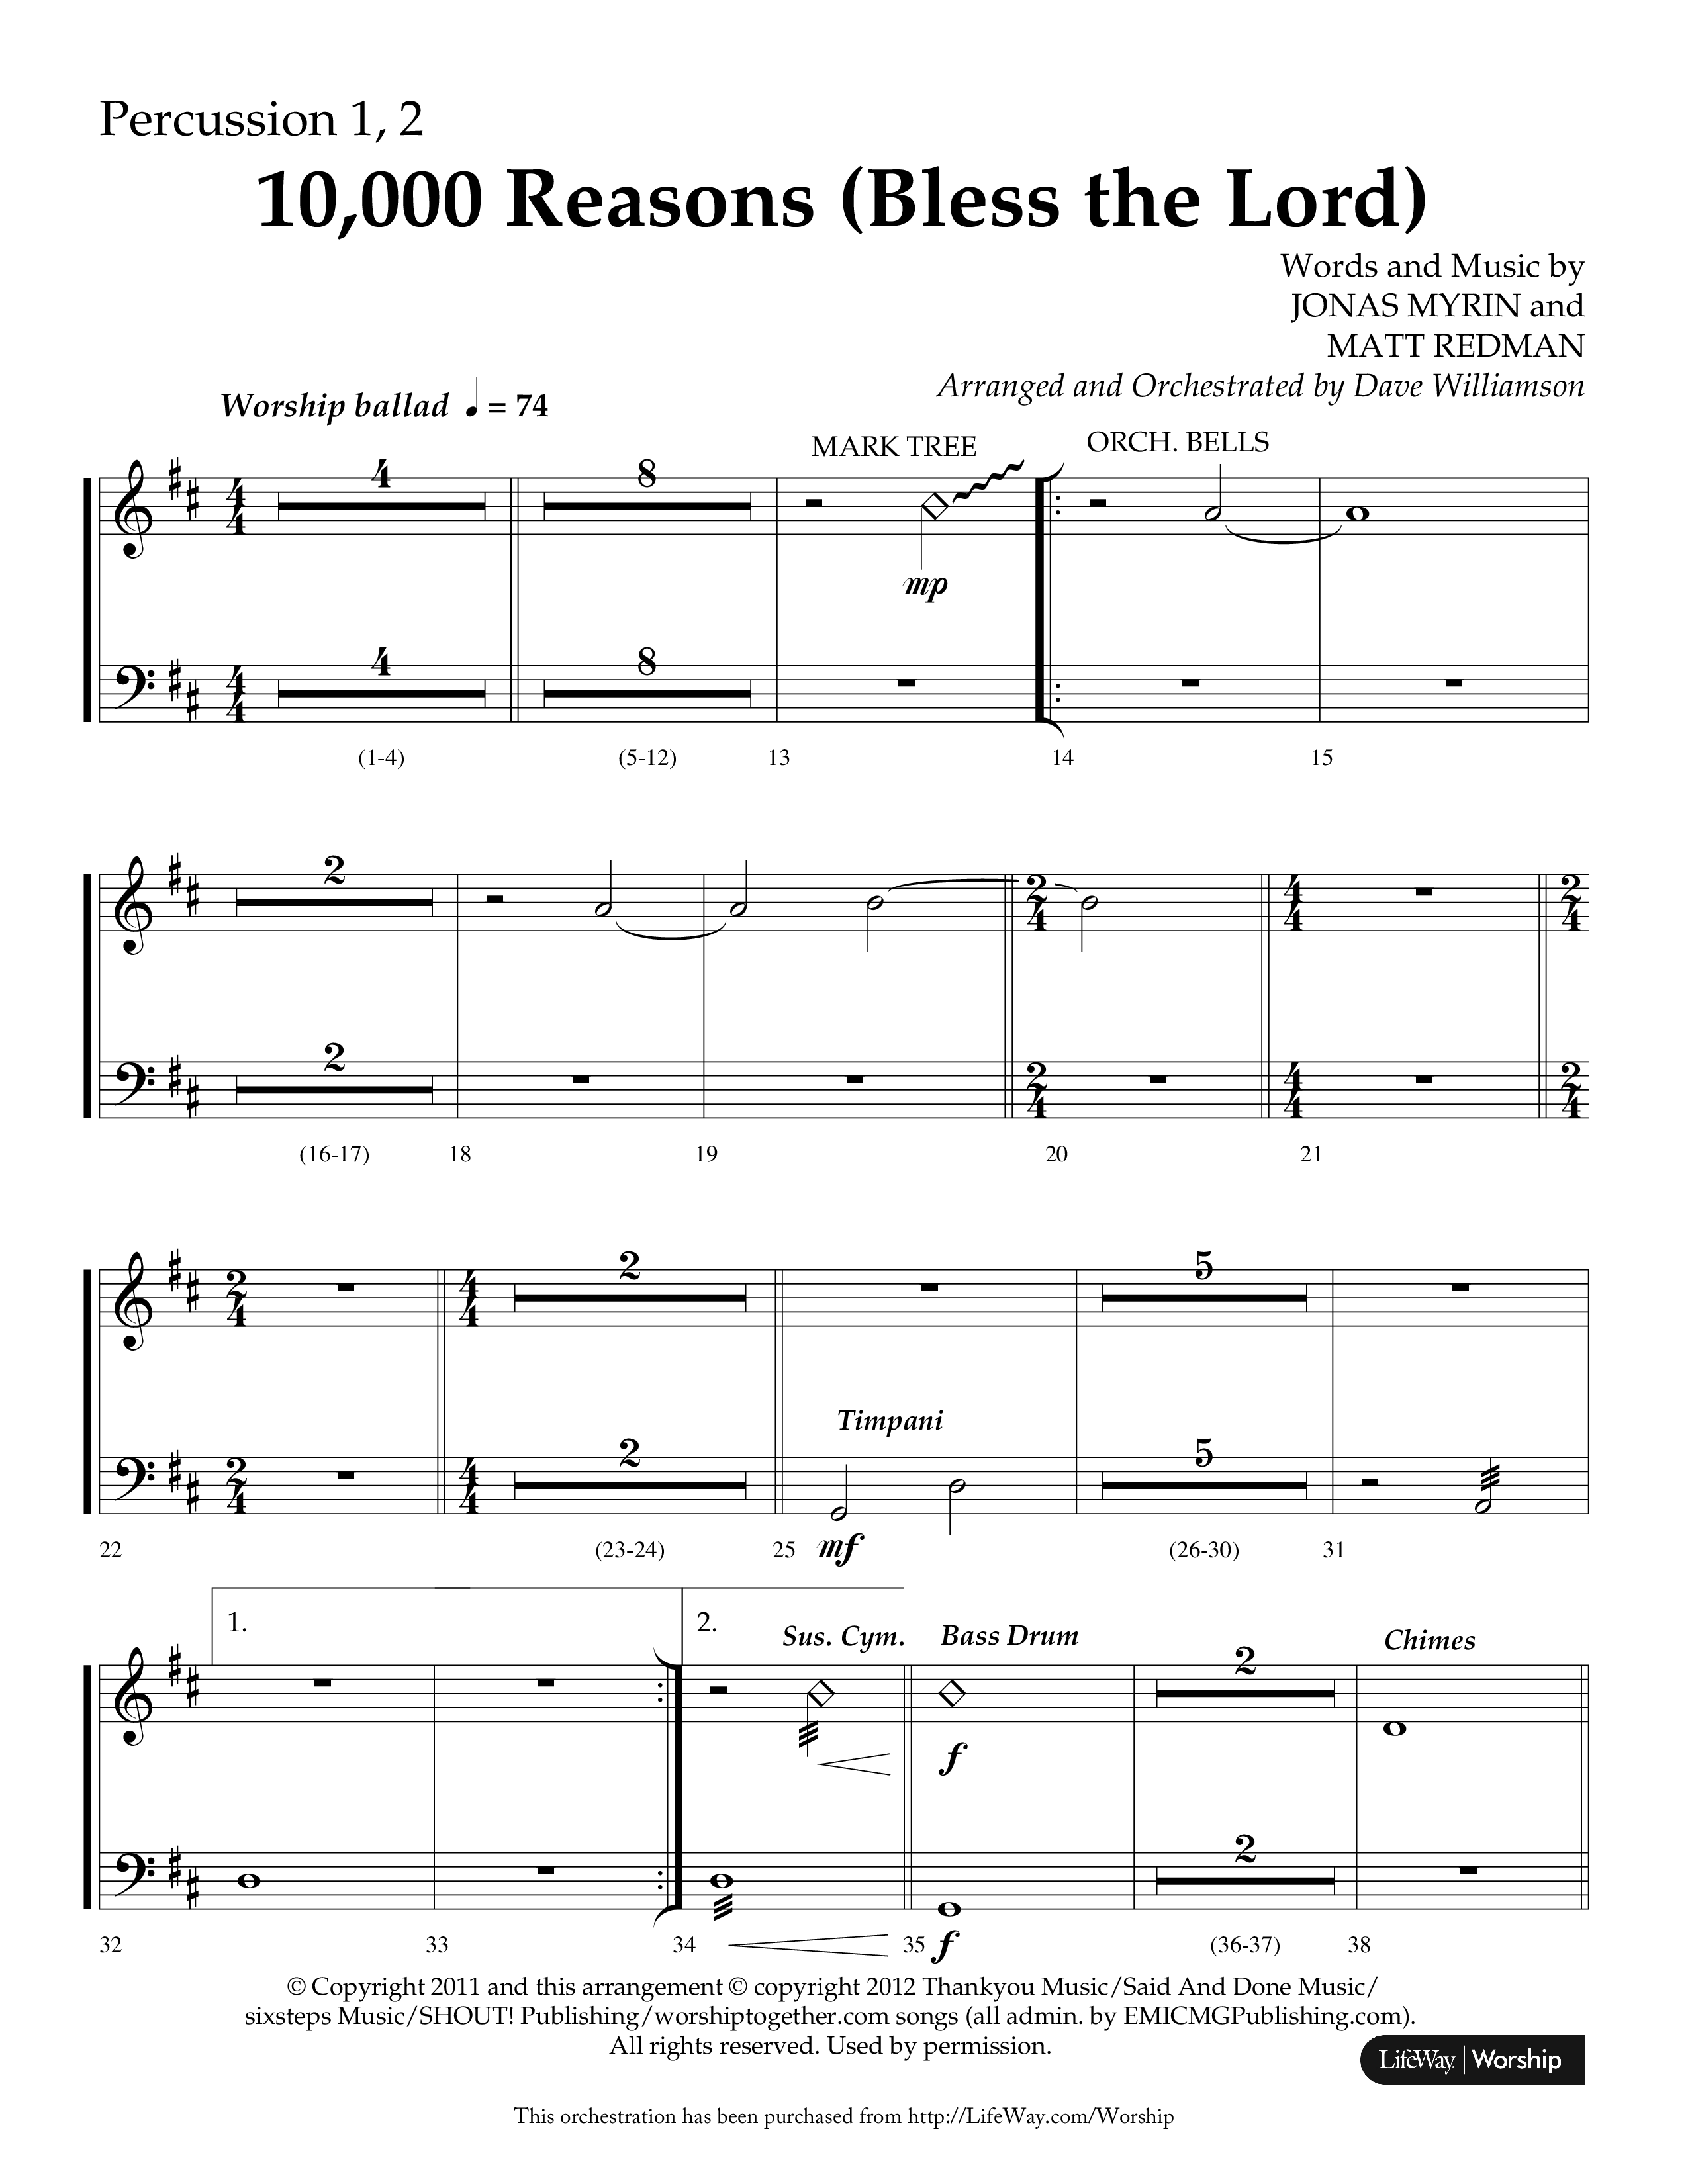 10,000 Reasons (Bless The Lord) (Choral Anthem SATB) Percussion 1/2 (Lifeway Choral / Arr. Dave Williamson)